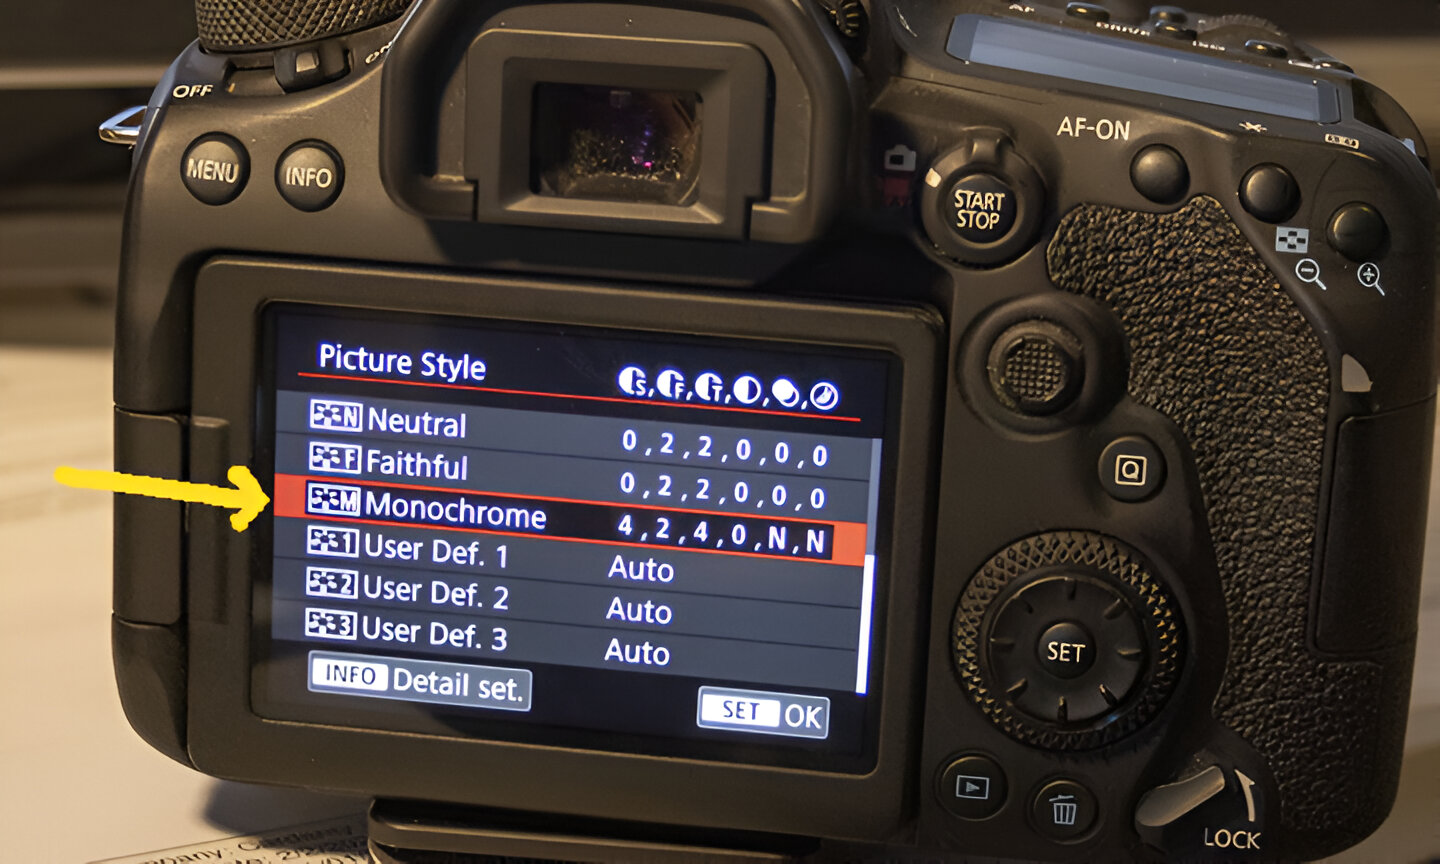 how-to-turn-on-the-bw-function-on-my-canon-eos-dslr-camera